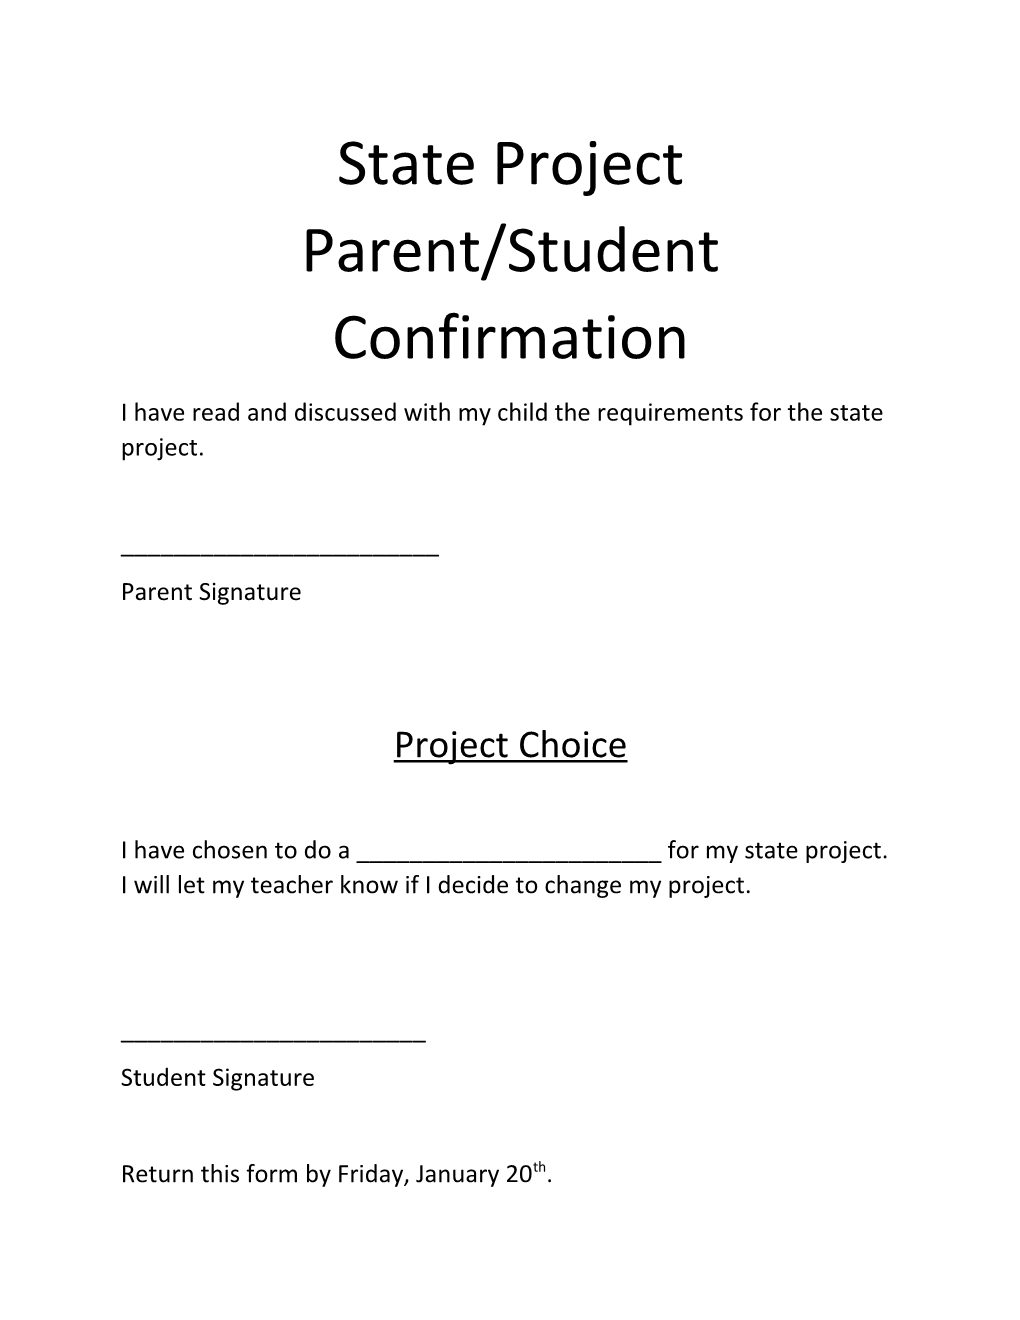 State Project Parent/Student Confirmation